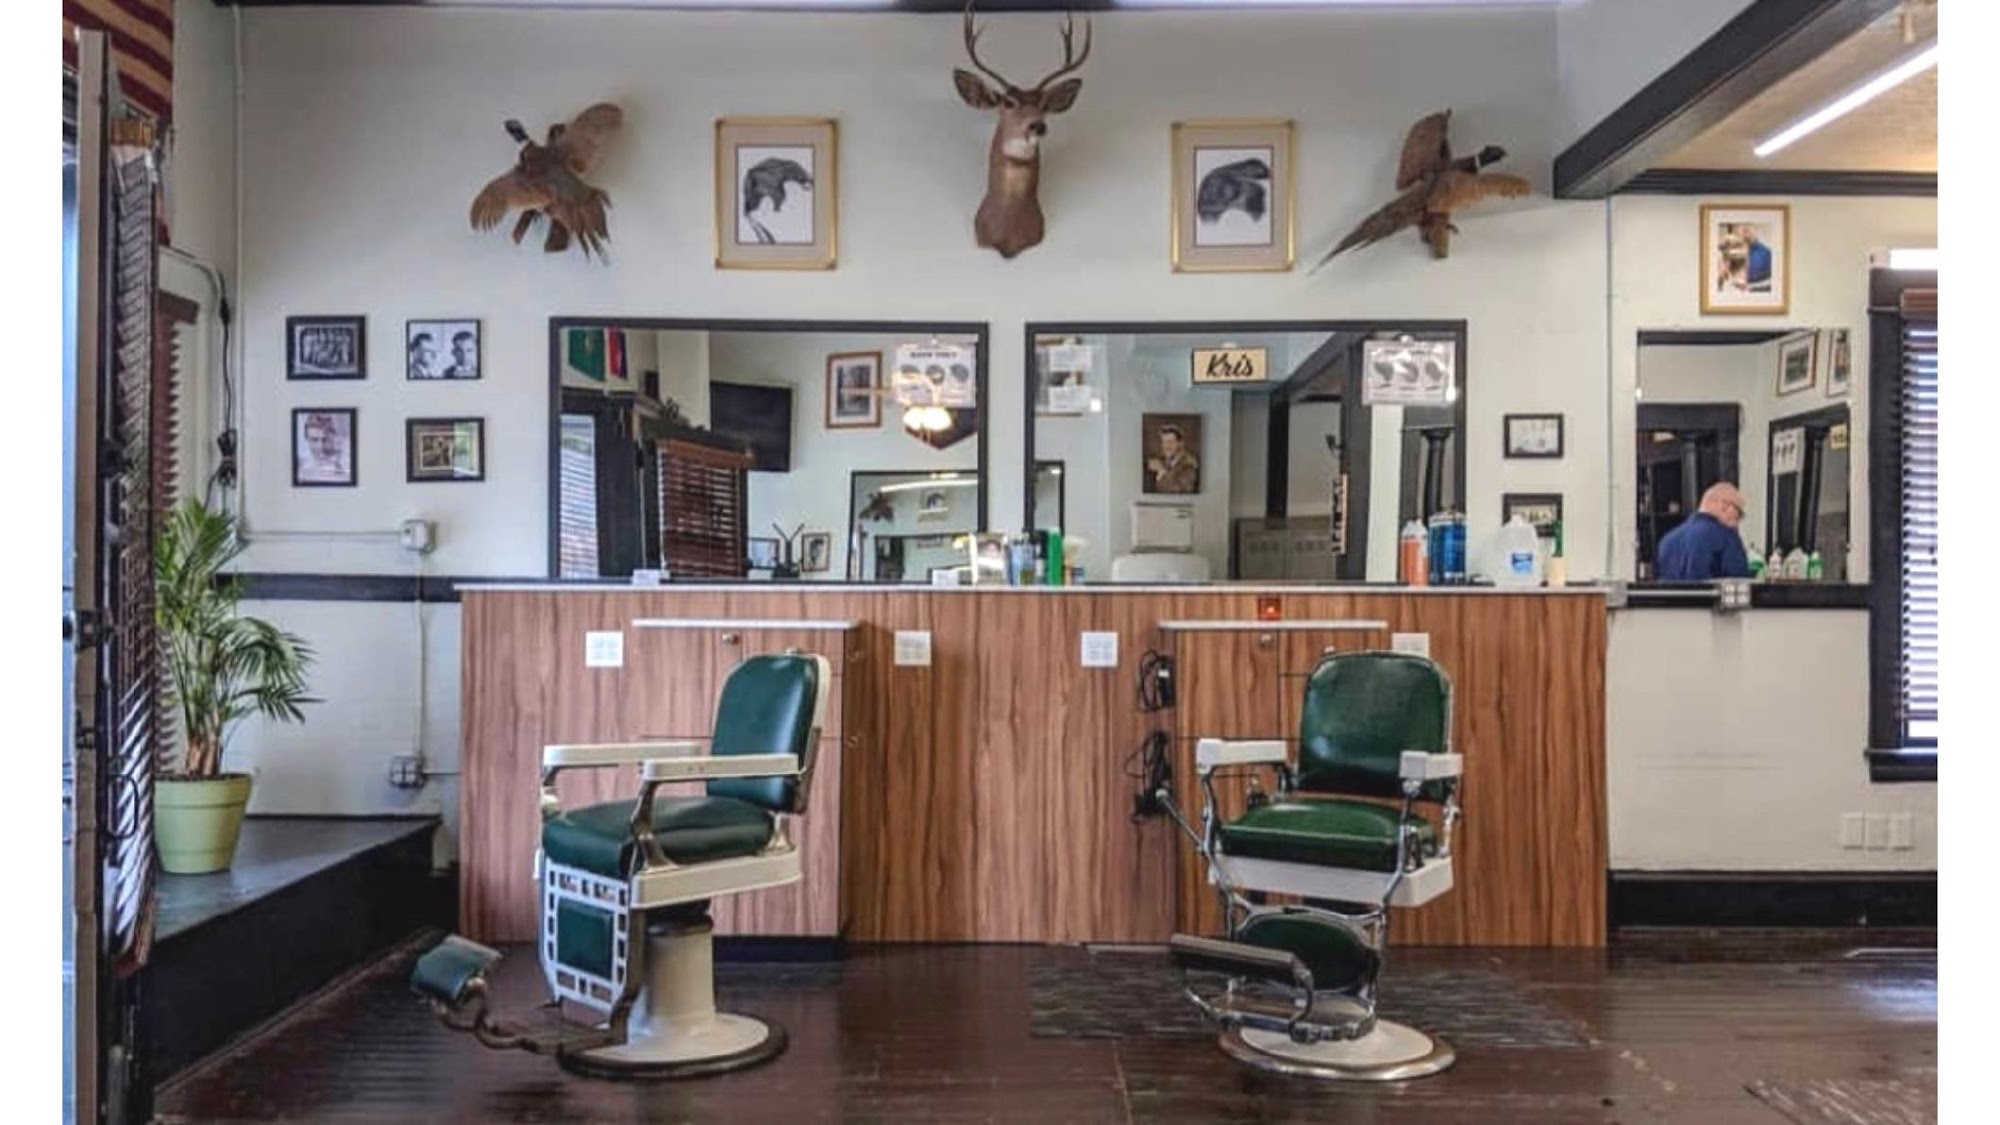 BECK’S formerly known as Lyle’s Barber Shop